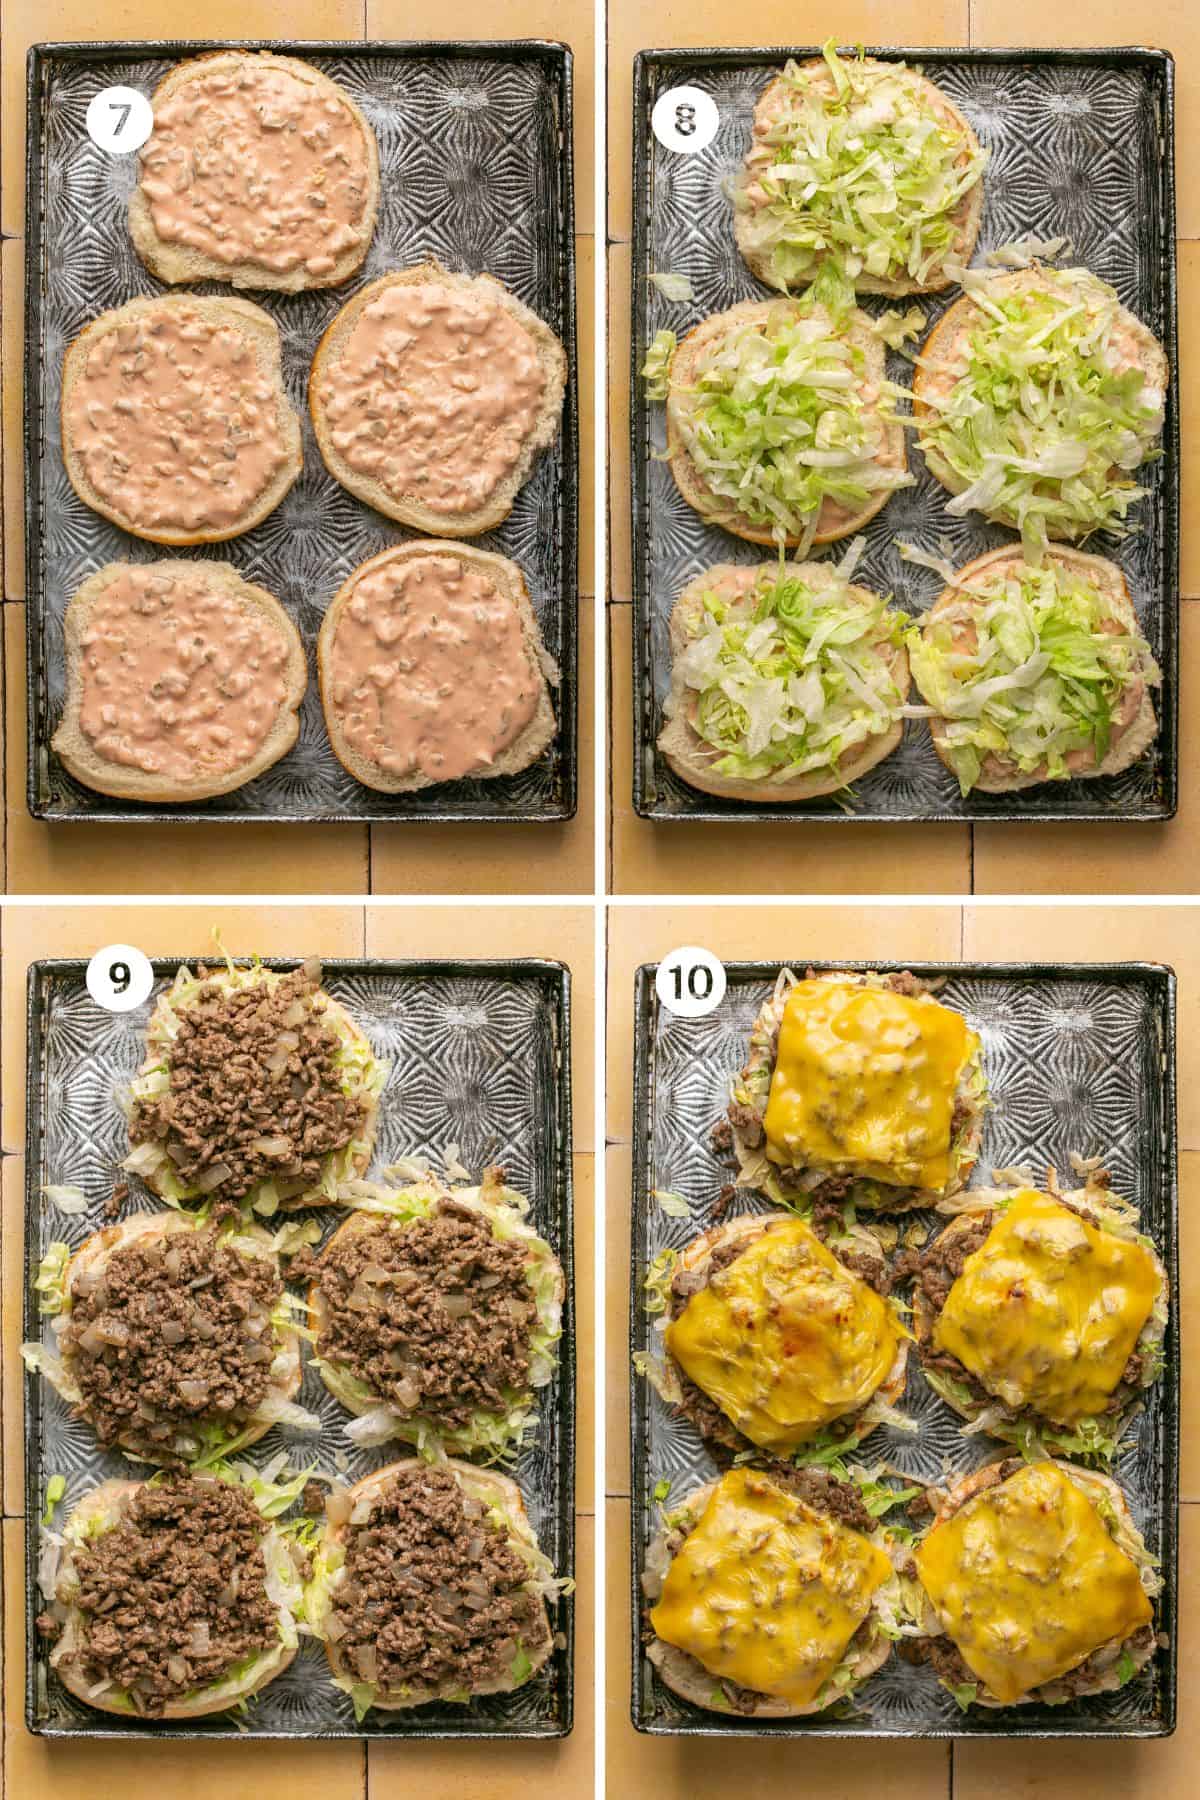 Four images showing how to layer sloppy joes with buns topped with sauce, then lettuce, then meat, then cheese broiled on top. 